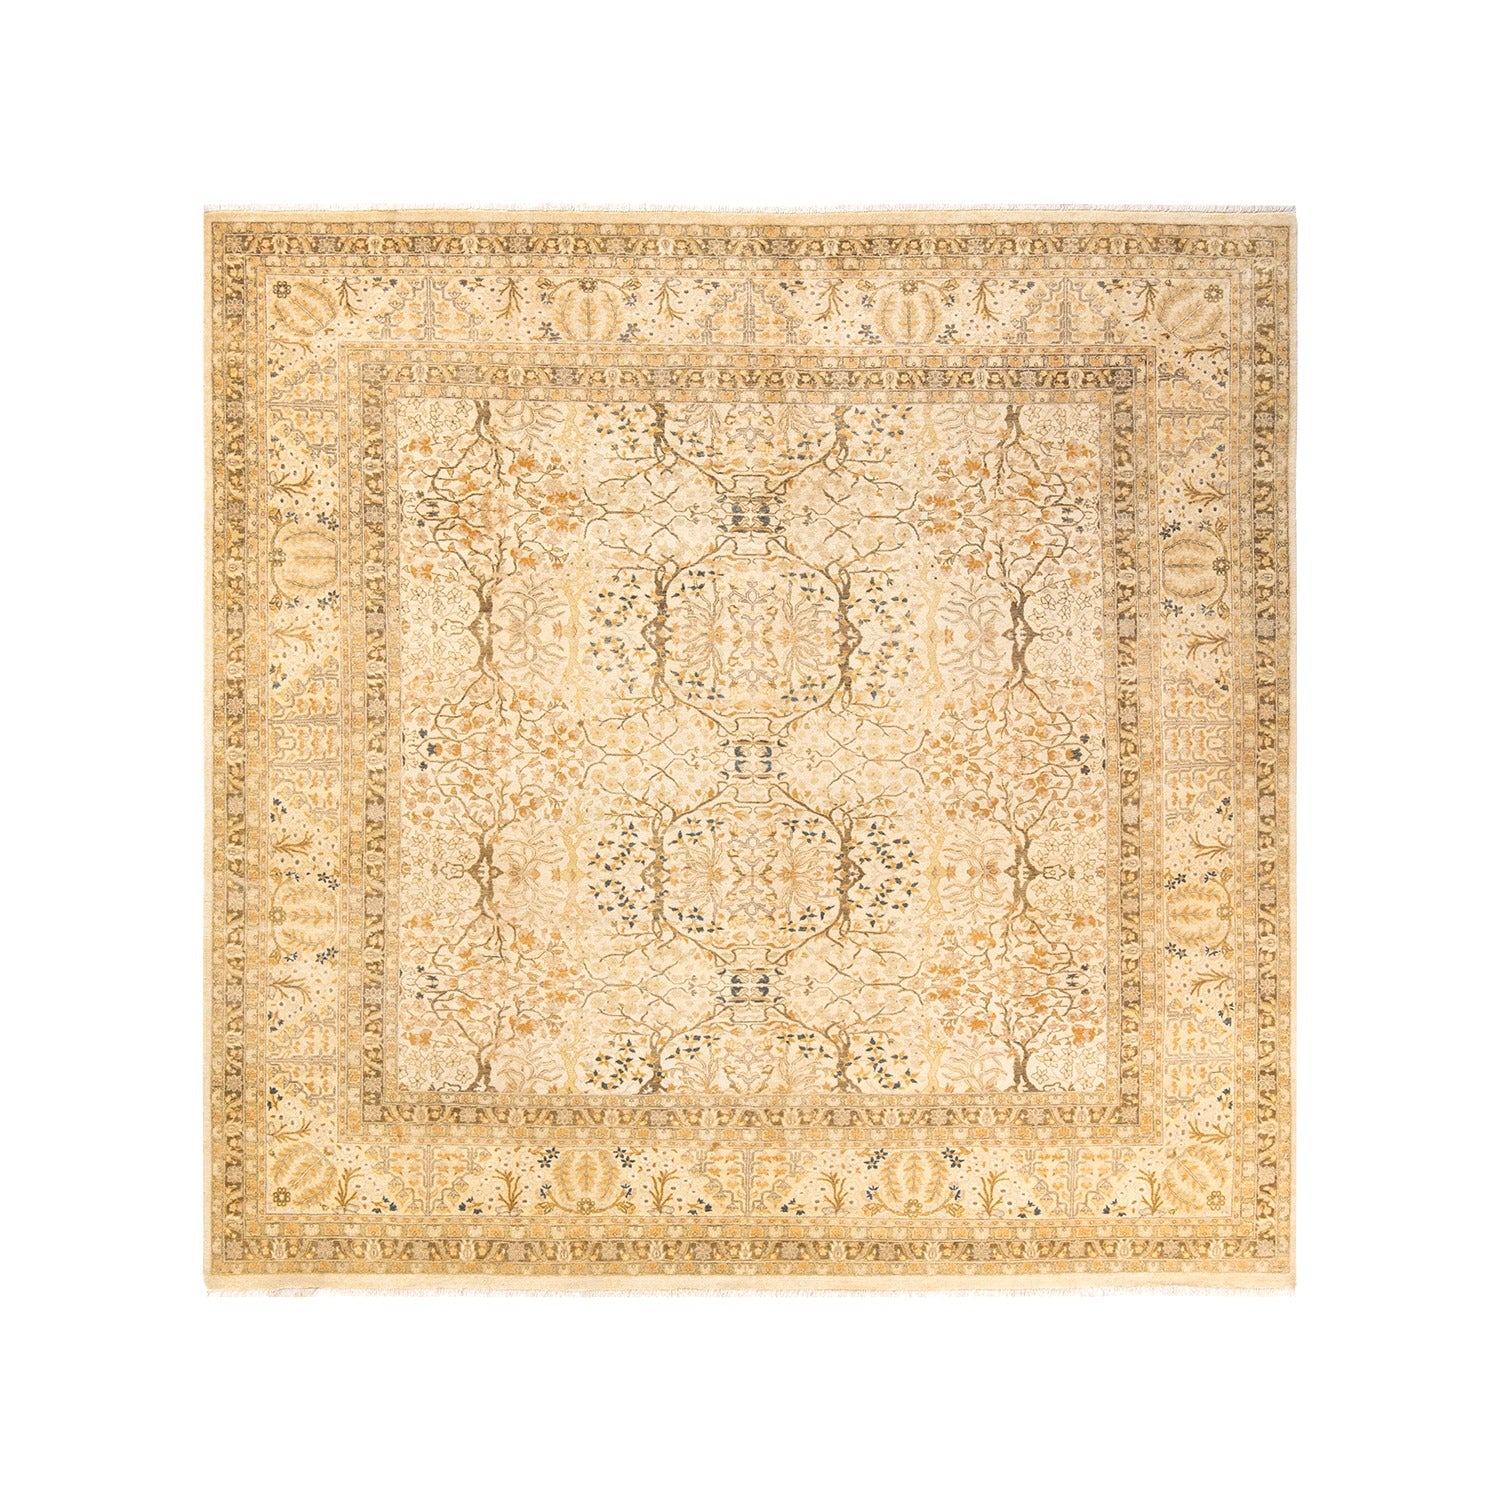 Exquisite hand-knotted Persian-style rug with intricate floral motifs on beige.